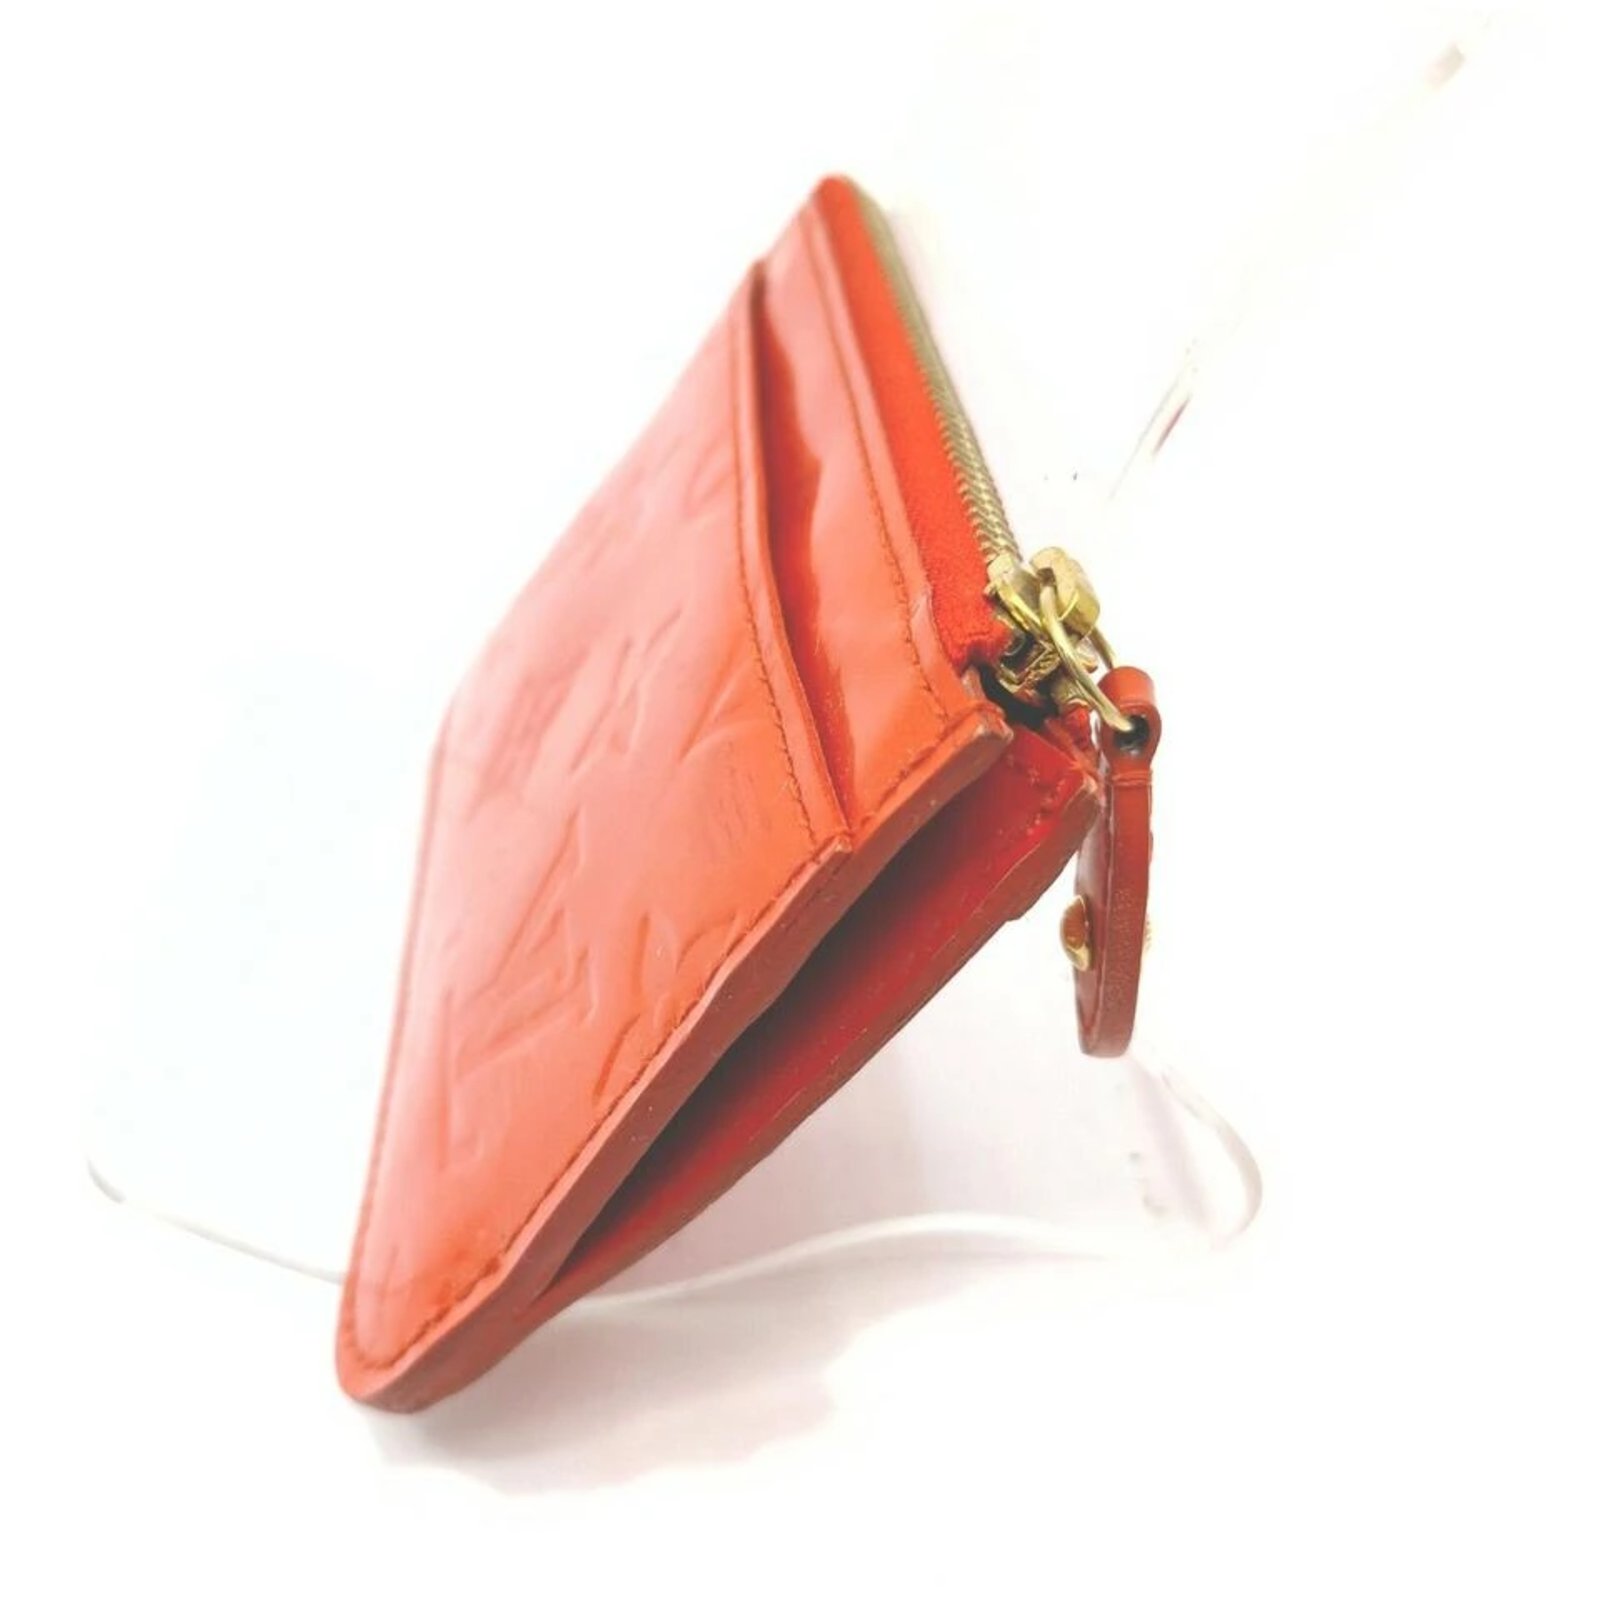 New Louis Vuitton Red Vernis Leather Pochette Cle Key Coin Pouch